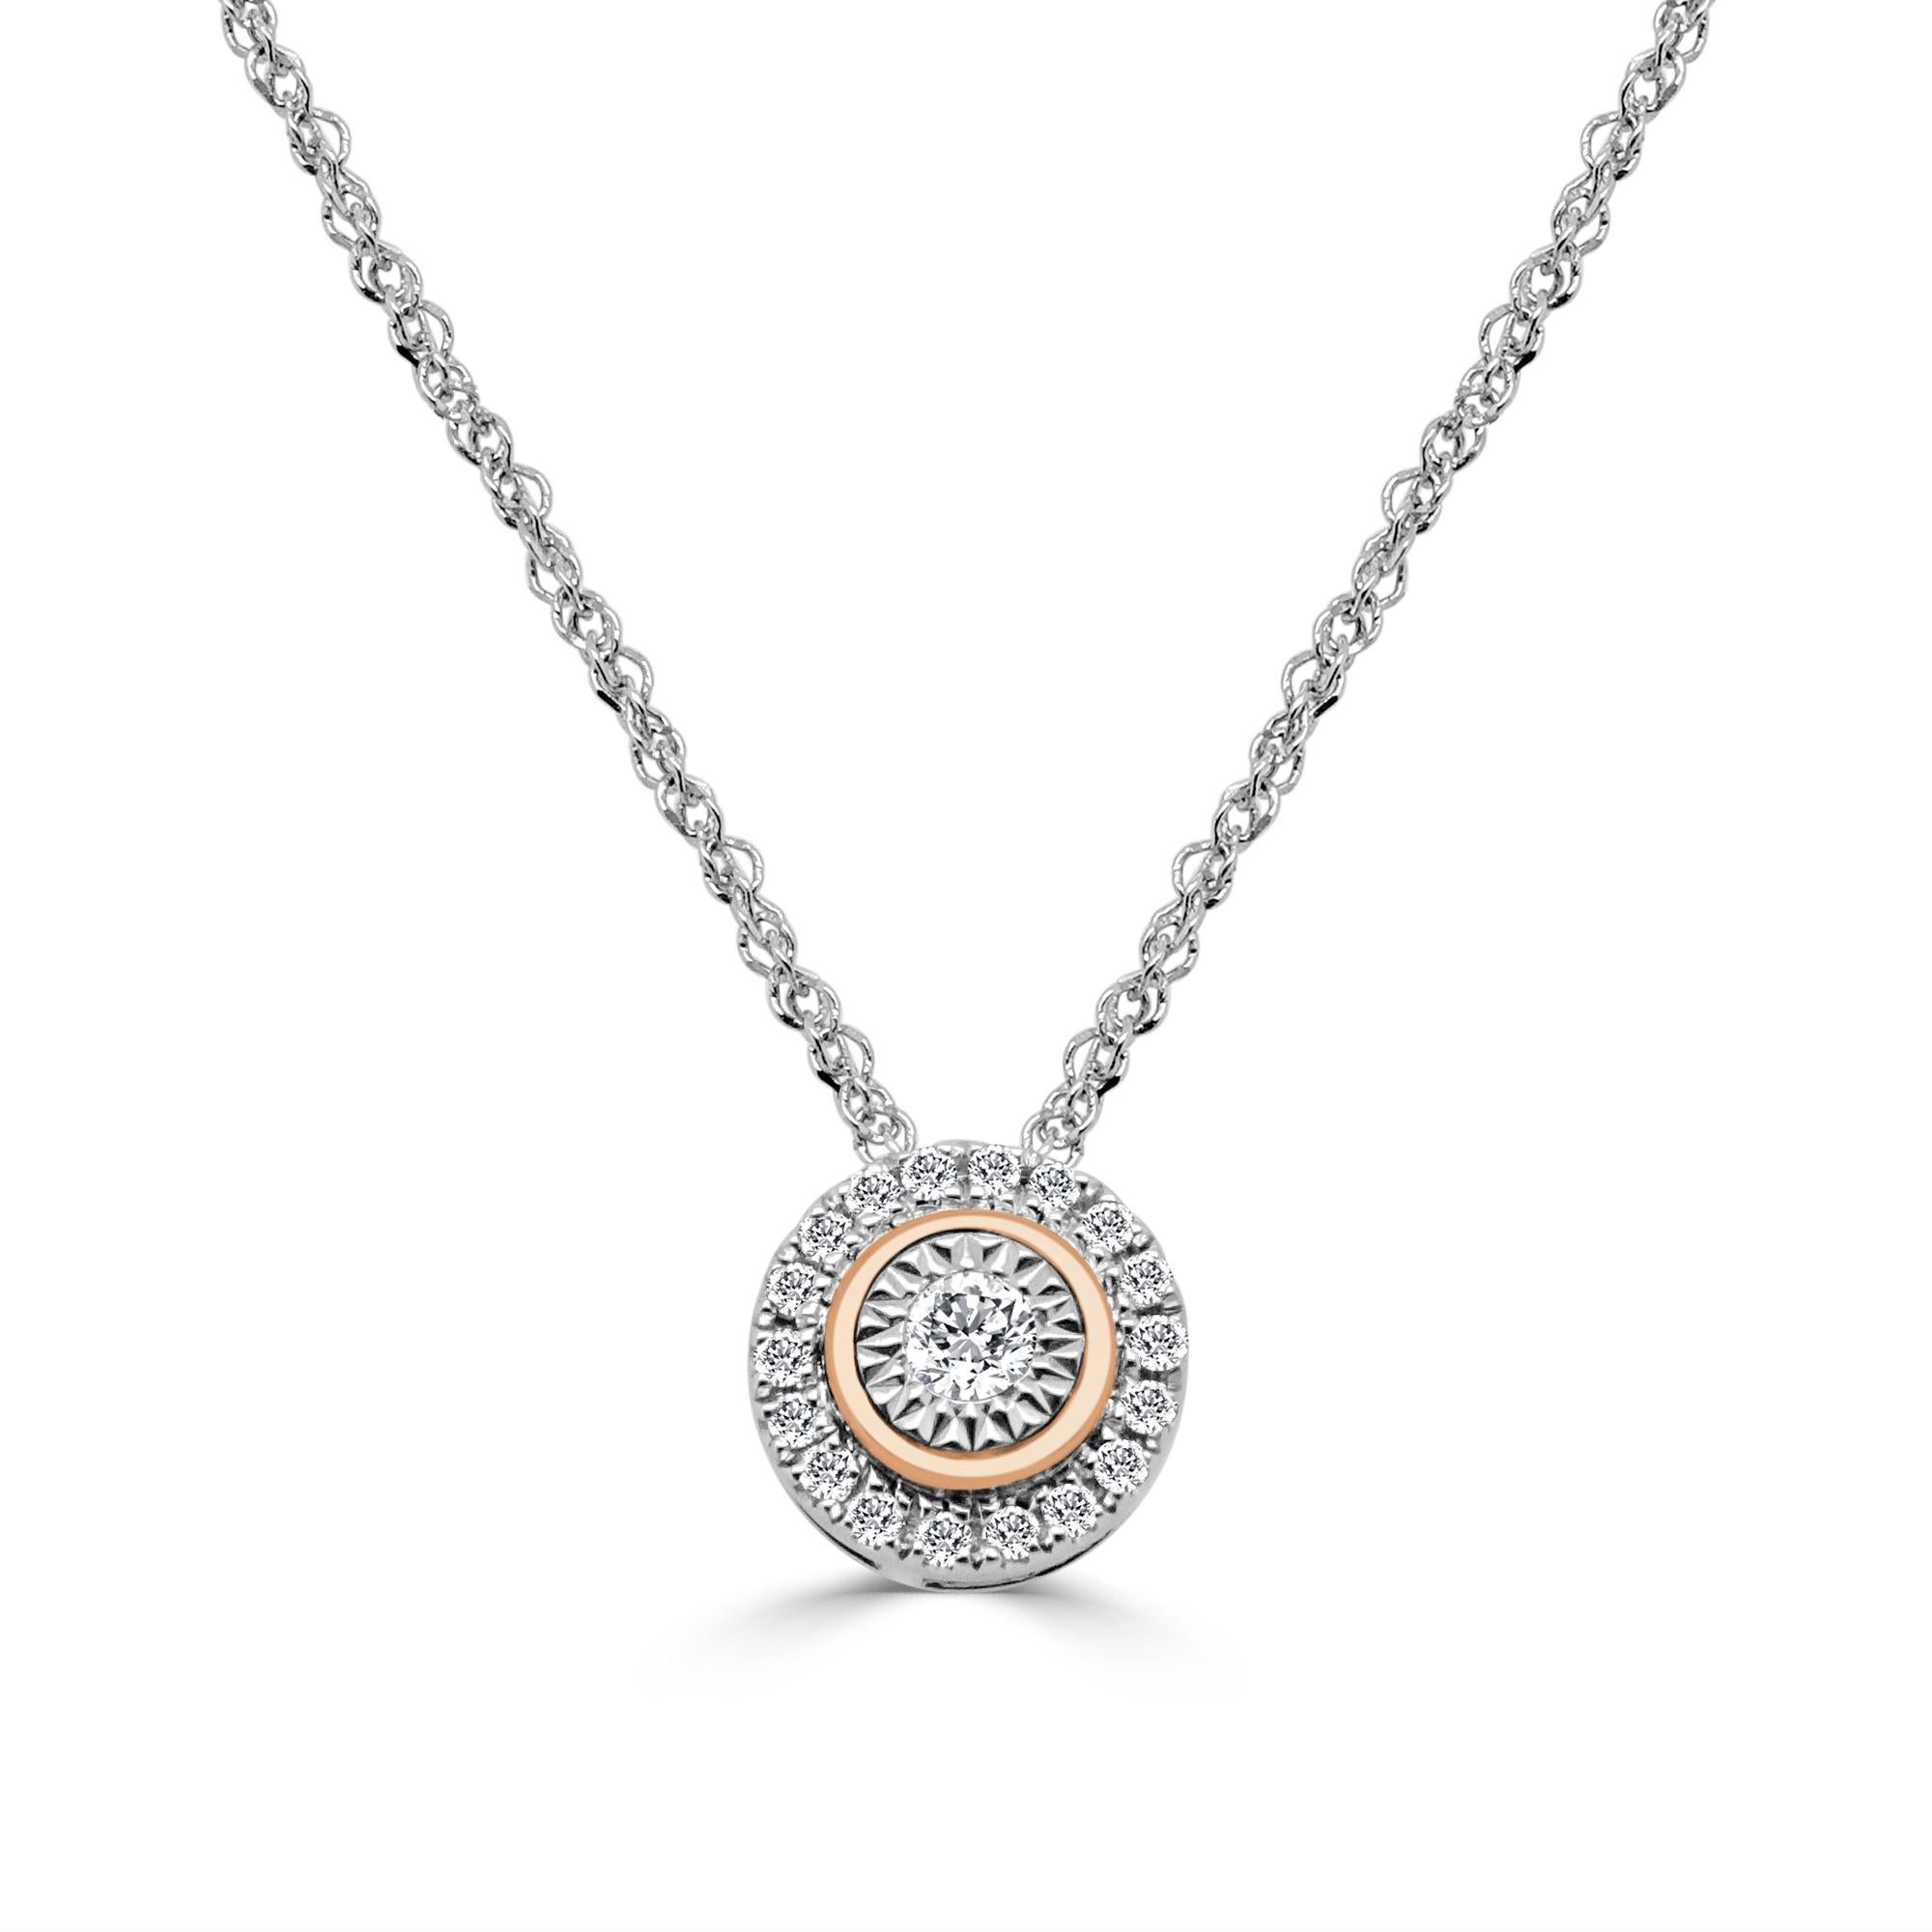 18 Karat Rose White Gold 0.12 Carat Diamond Chain Necklace Wedding Fine Jewelry 

This necklace is an incredible statement piece. One of a kind.Gentle and elegant pendant is crafted in a sleek rose white gold. Featuring round cut diamonds, together